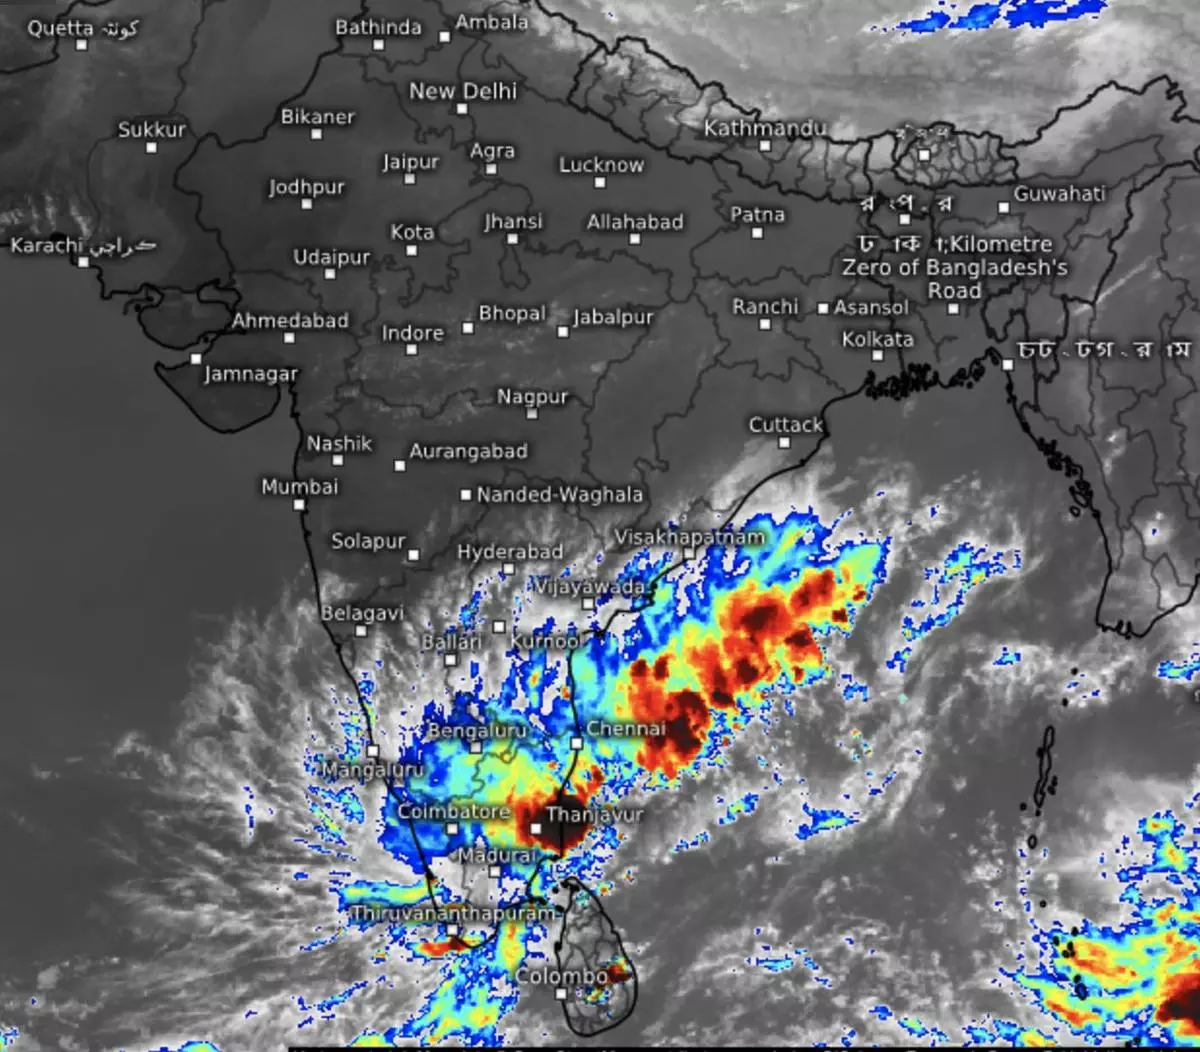 A barrage of thunderstorms bore down on the Andhra Pradesh and the Tamil Nadu coasts under the watch of a well-marked low-pressure area off the Tamil Nadu coast, as revealed by satellite pictures on Friday evening 